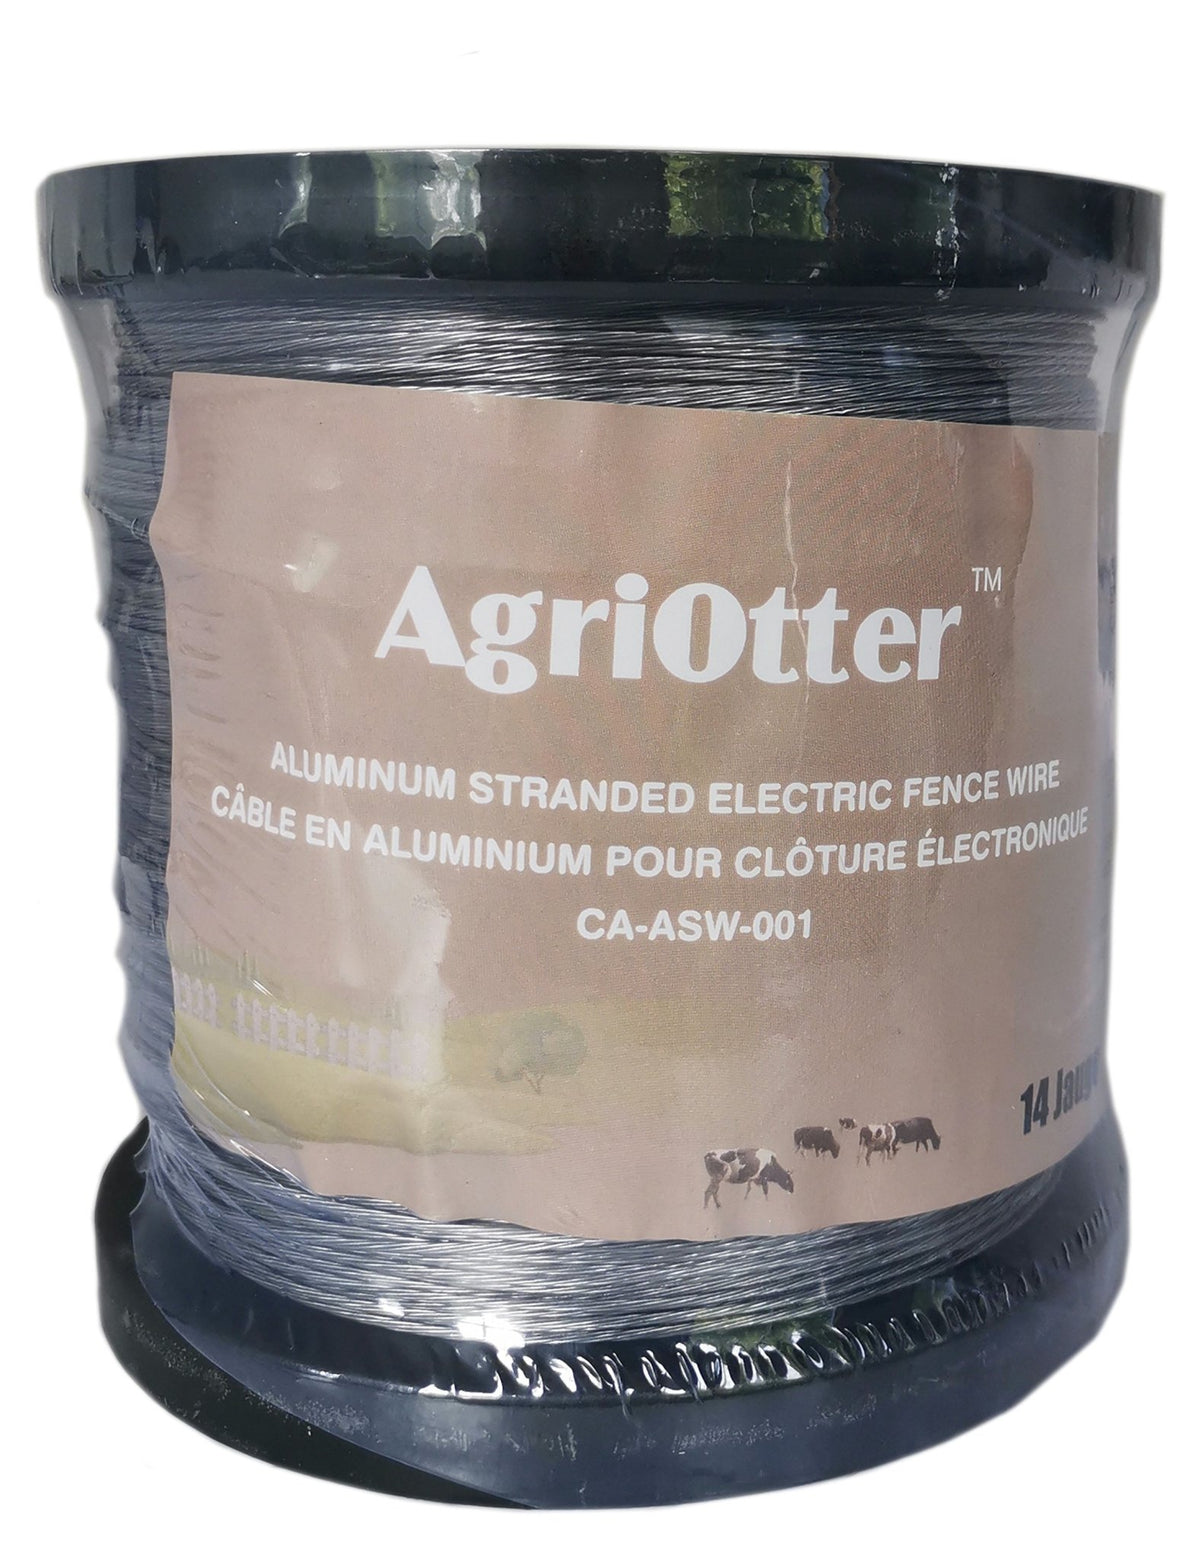 Aluminum Stranded Electric Fence Wire for Garden Fence, Electric Fence, 5/16 Mile(500M) 16 Gauge (1.6mm) - AgriOtter